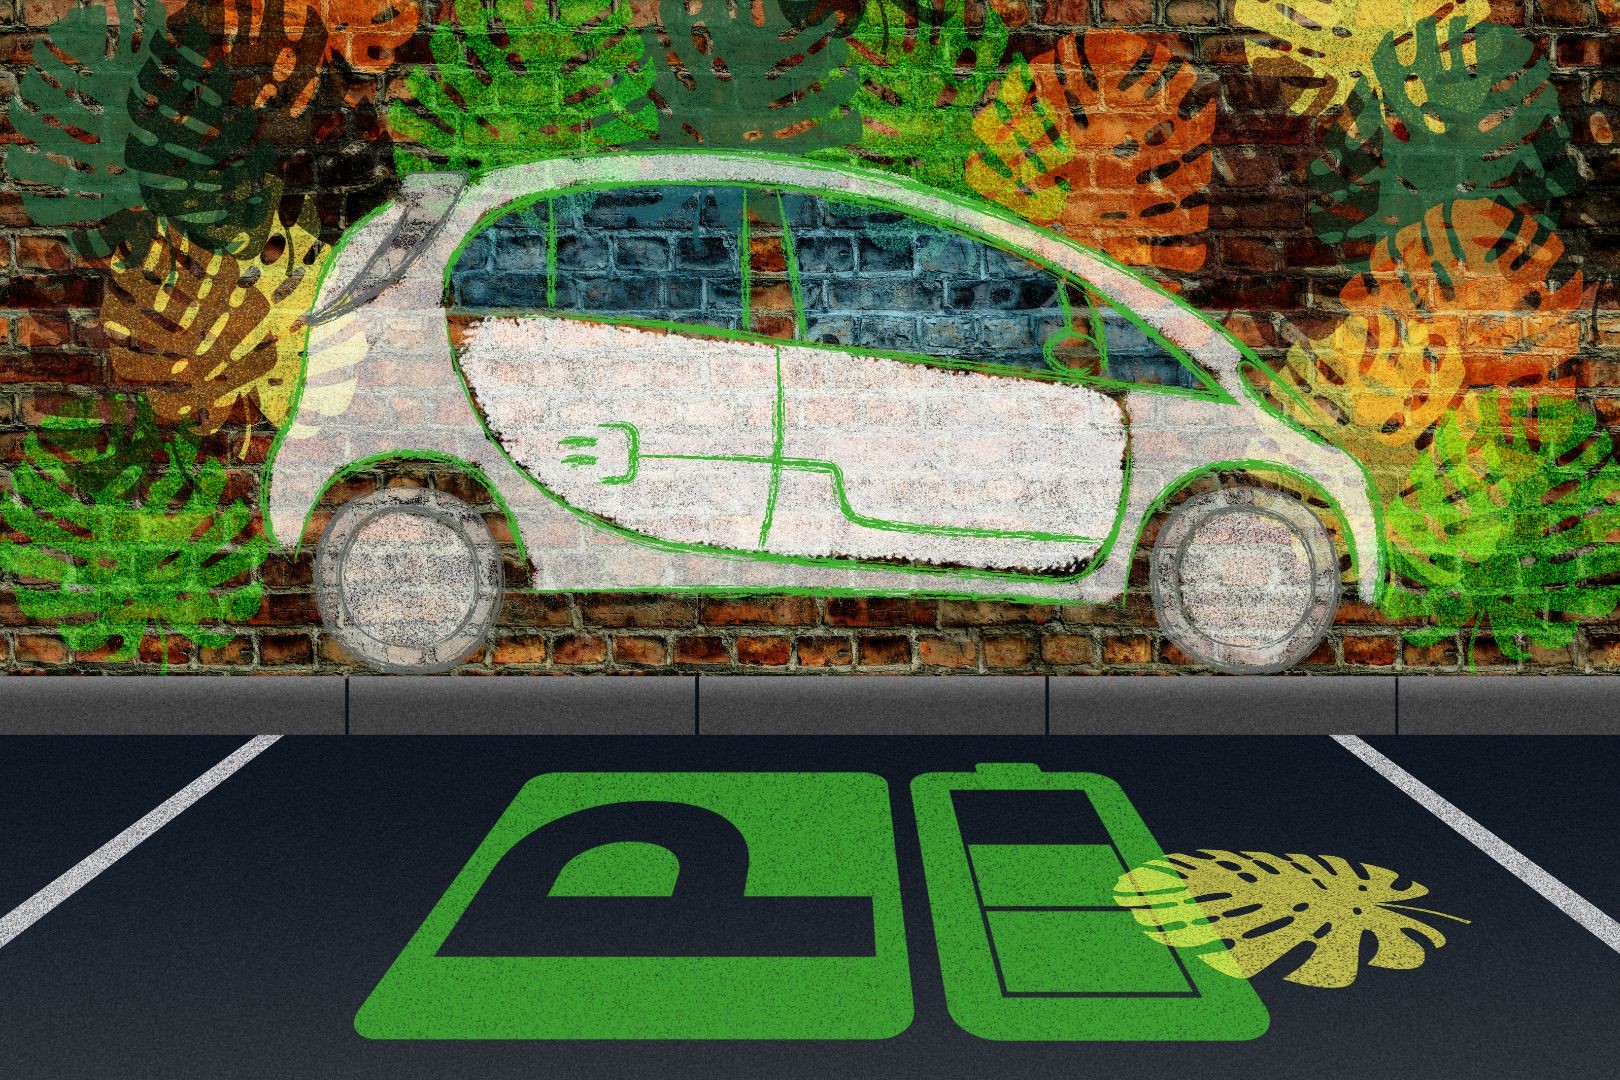 Electric Vehicle Adoption in India